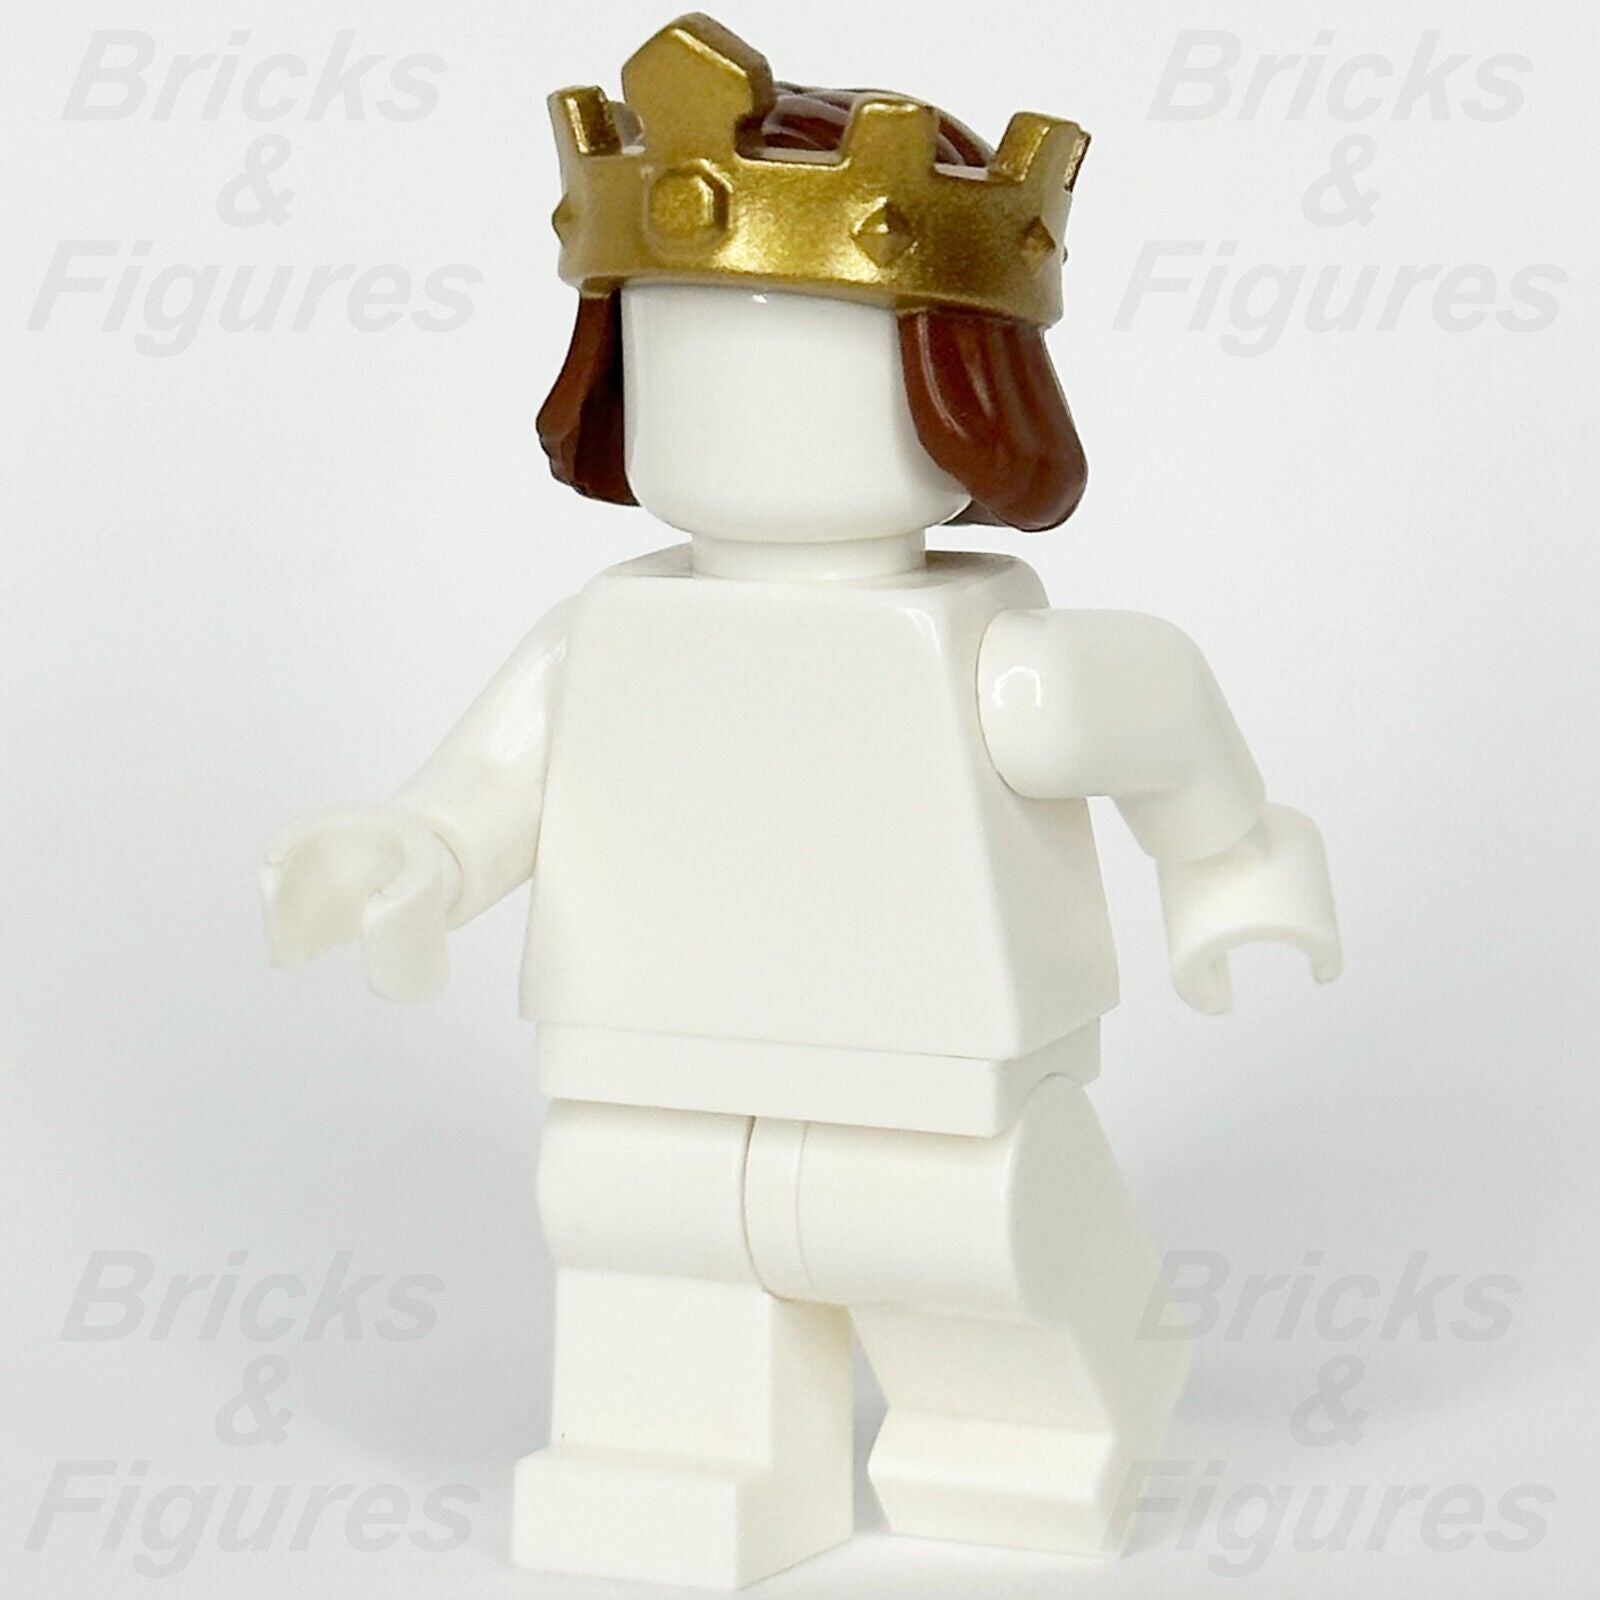 LEGO Castle Gold Crown with Reddish Brown Hair Minifigure Part 18835pb01 King 4